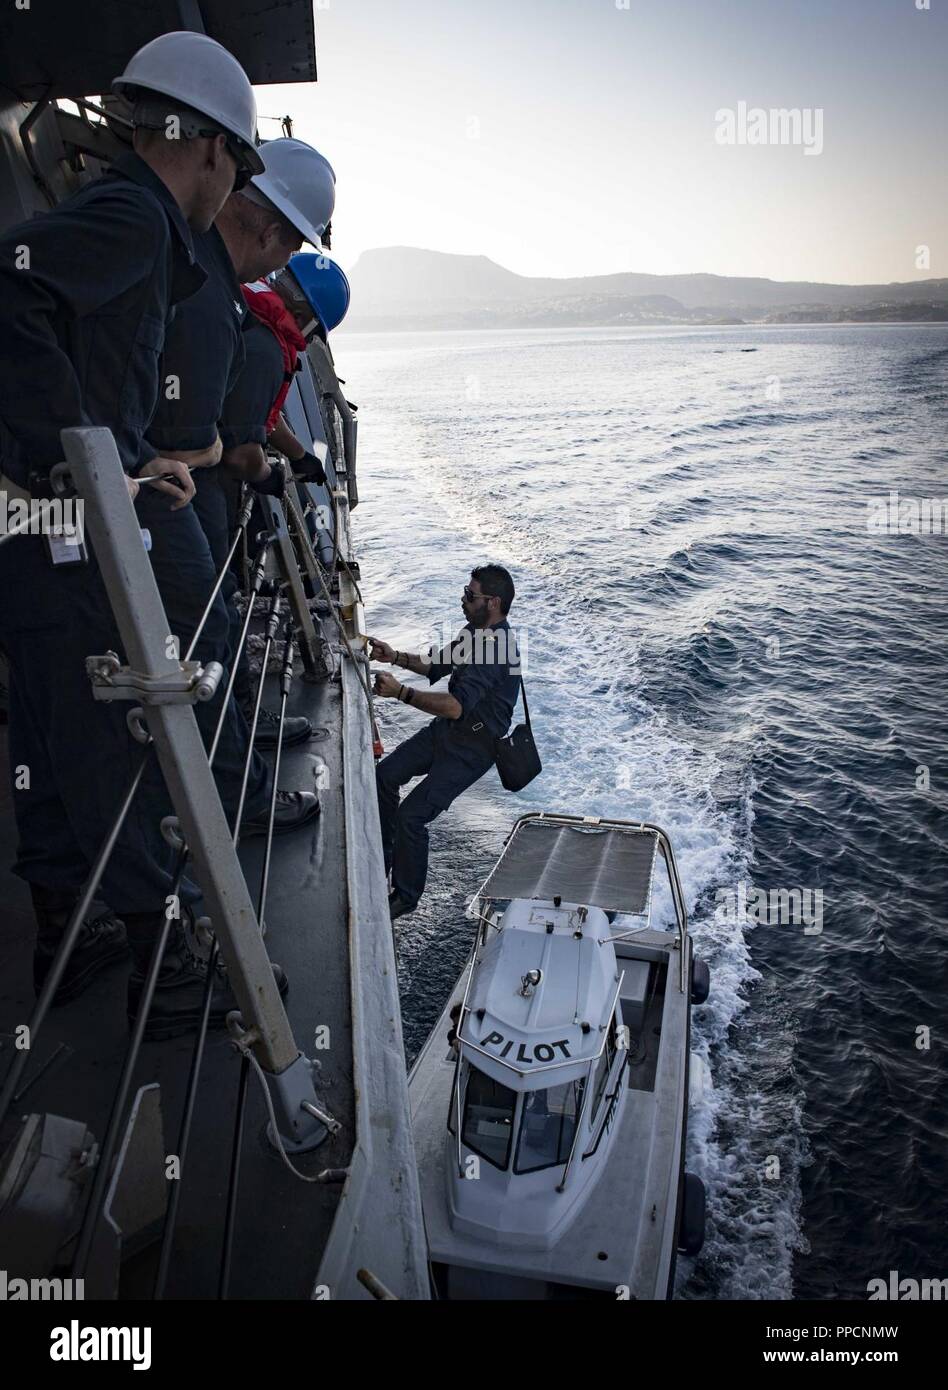 BAY, Greece (Sept. 2, 2018) A harbor pilot boards the Arleigh Burke-class guided-missile destroyer USS Carney (DDG 64) as the ship arrives in Souda Bay, Greece, Sept. 2, 2018. Carney, forward-deployed to Rota, Spain, is on its fifth patrol in the U.S. 6th Fleet area of operations in support of regional allies and partners as well as U.S. national security interests in Europe and Africa. Stock Photo